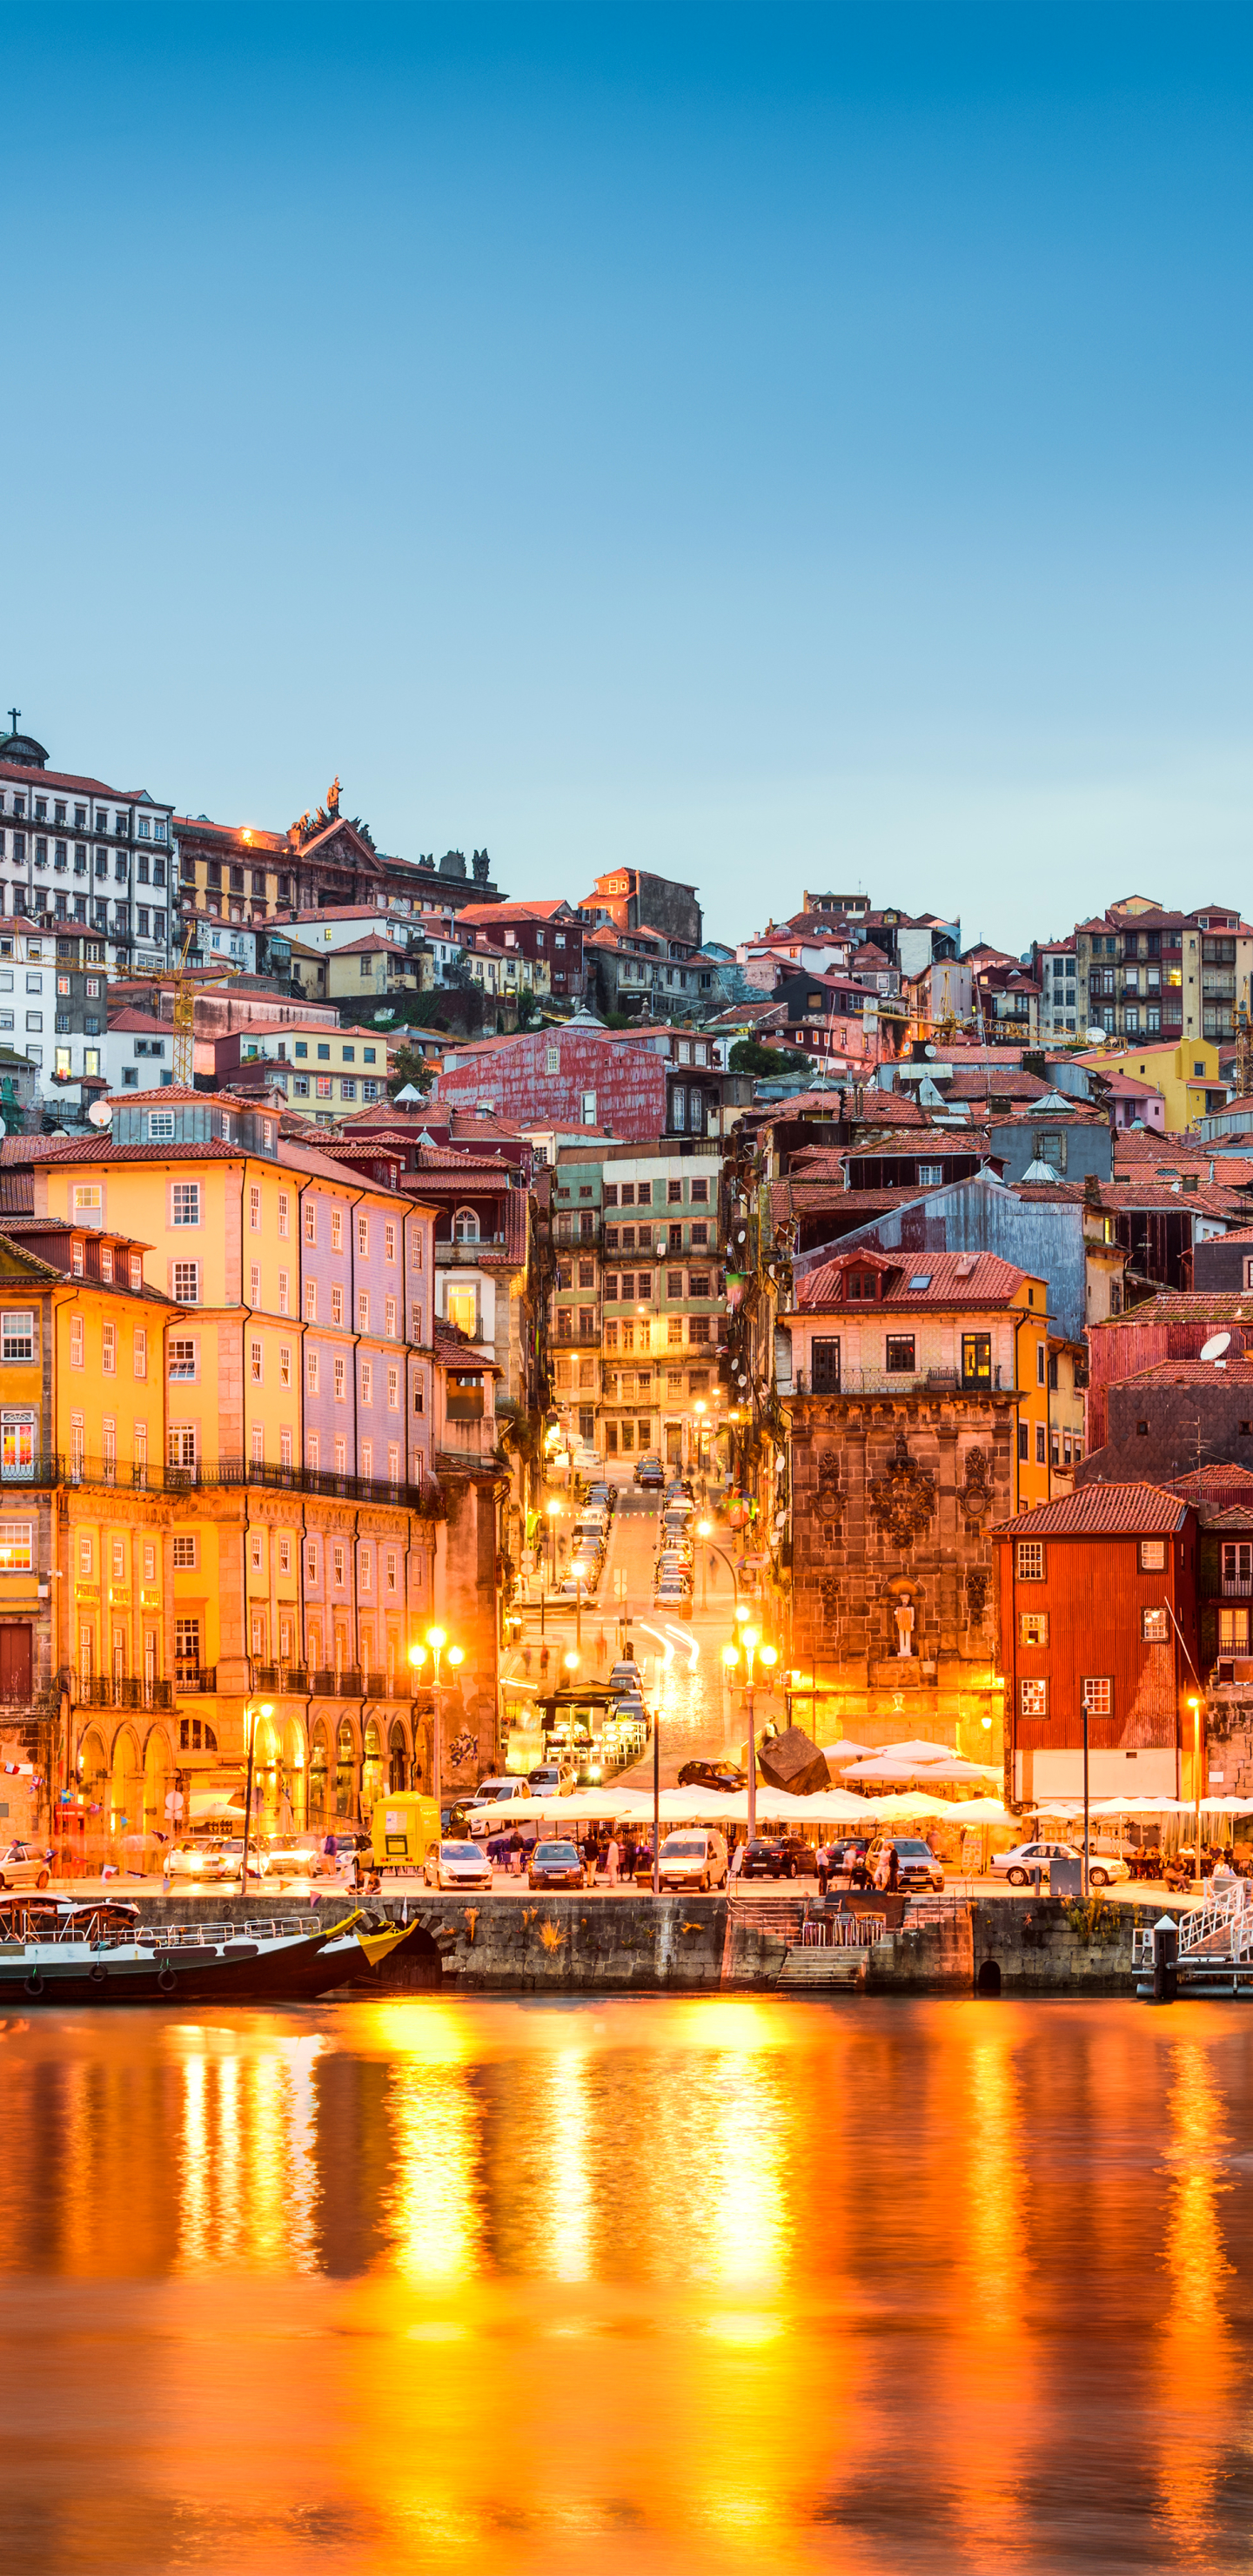 man made, porto, city, architecture, portugal, colorful, light, house, cities